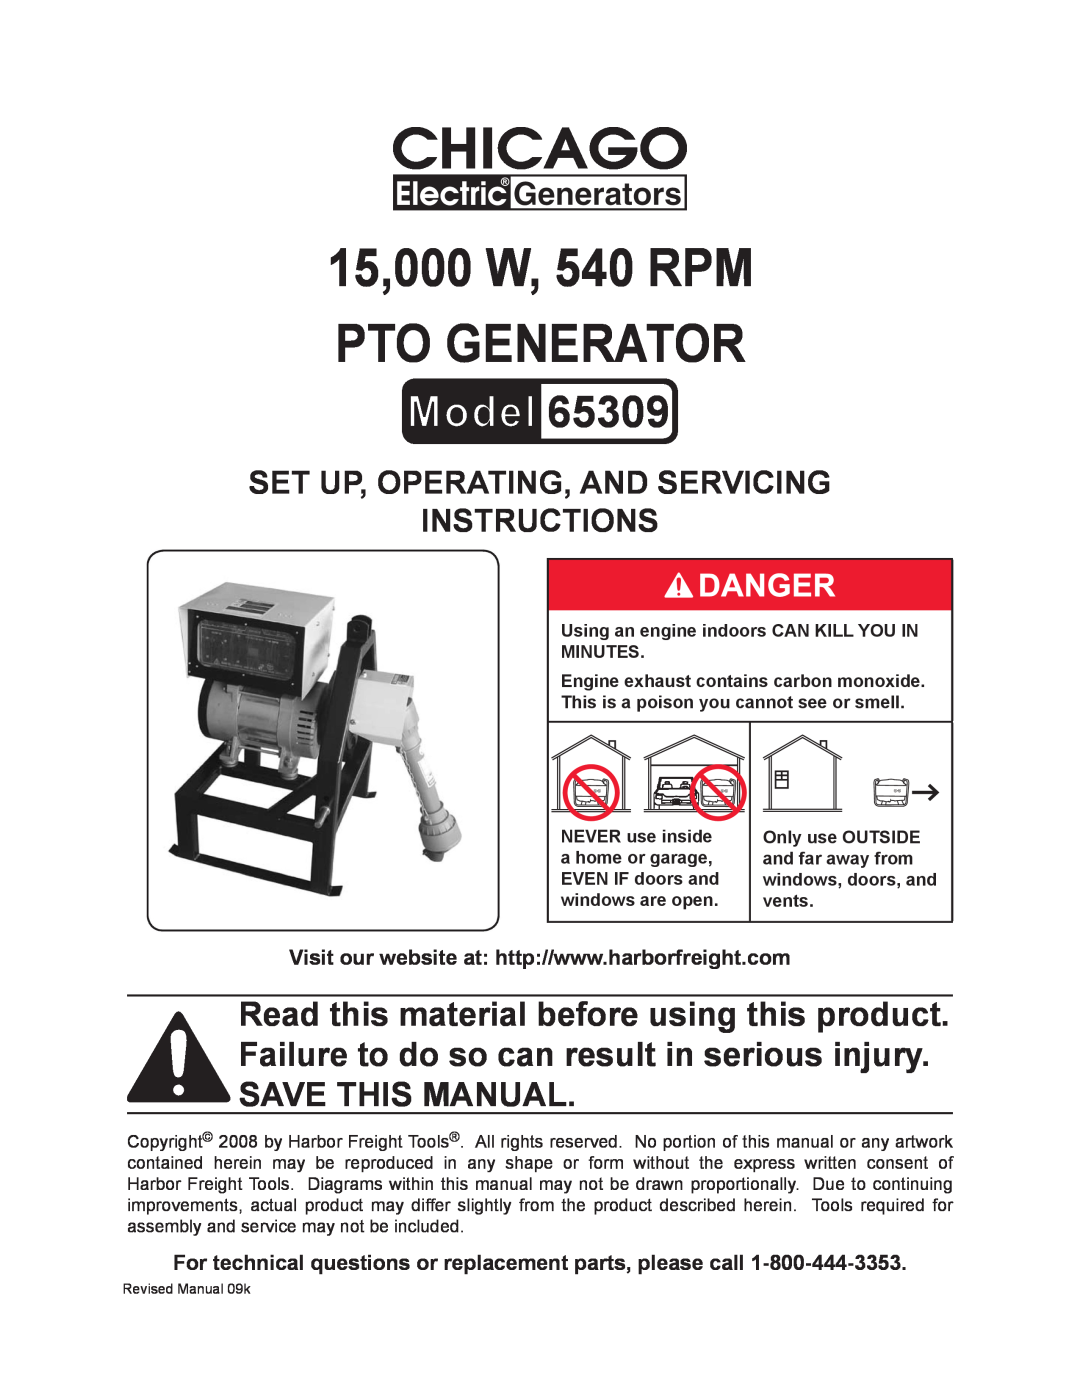 Harbor Freight Tools 65309 manual 15,000 W, 540 RPM PTO Generator, Set up, Operating, and Servicing Instructions 